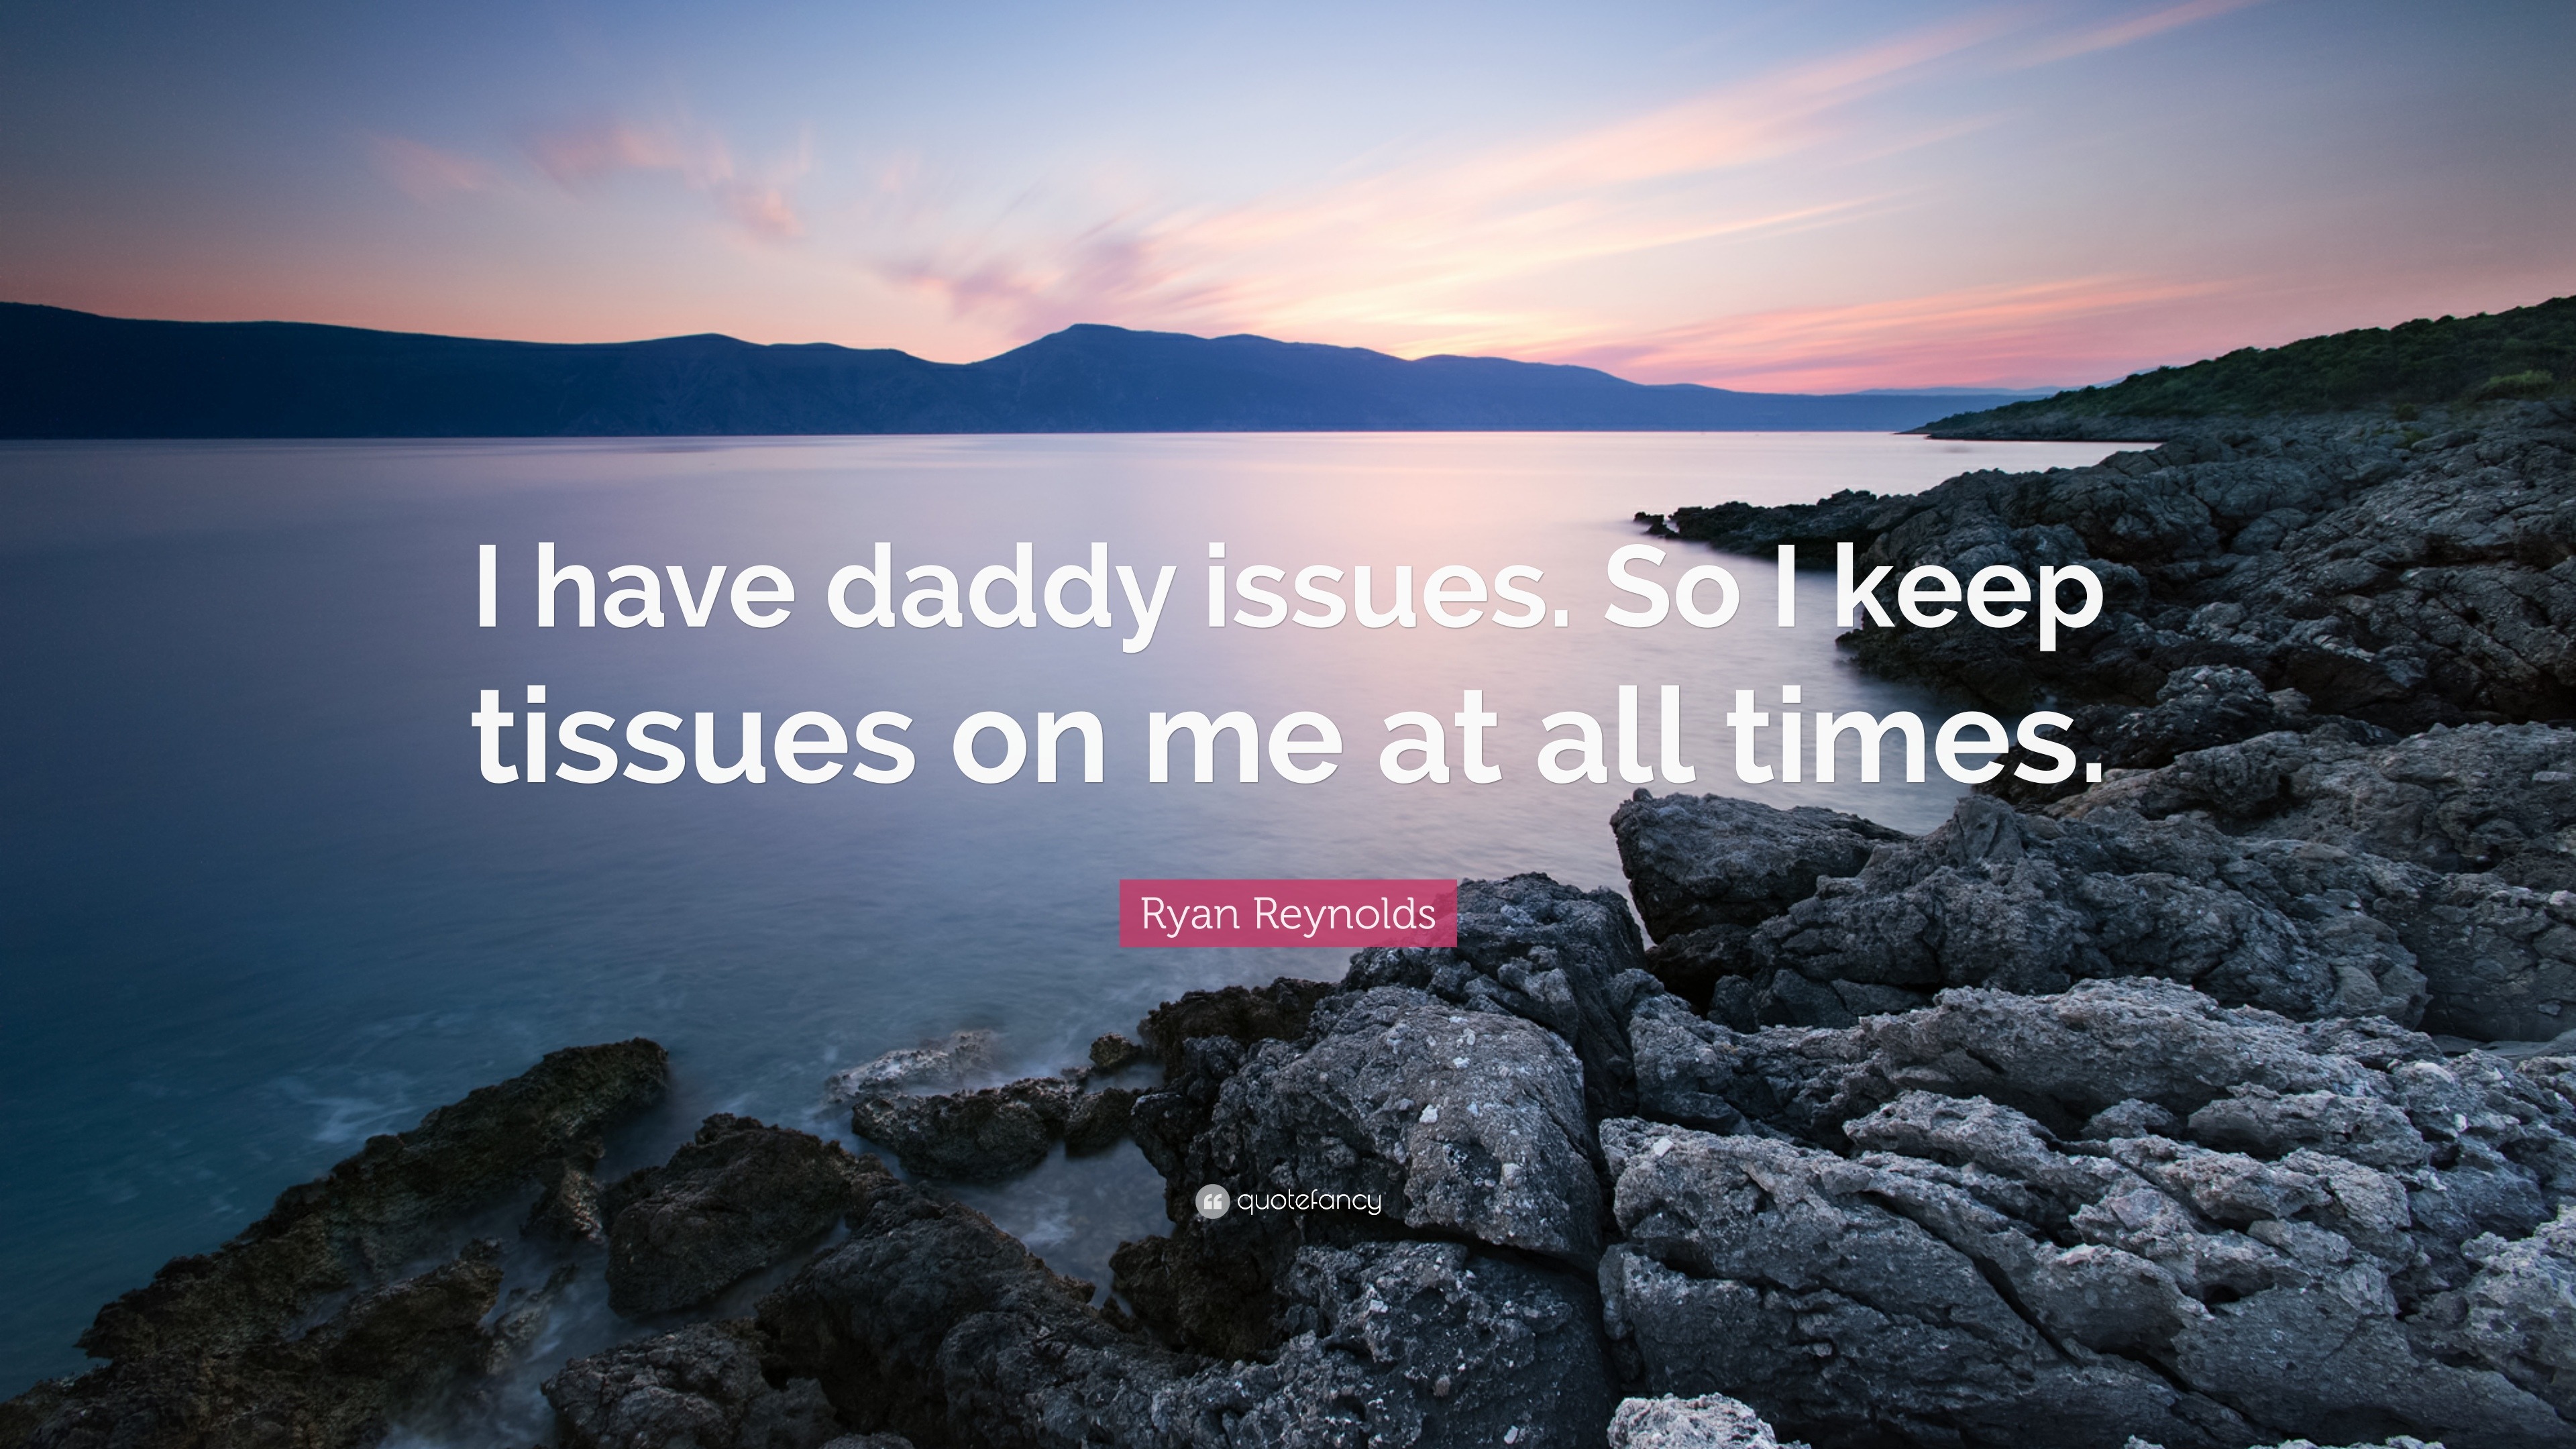 https://quotefancy.com/media/wallpaper/3840x2160/726093-Ryan-Reynolds-Quote-I-have-daddy-issues-So-I-keep-tissues-on-me-at.jpg